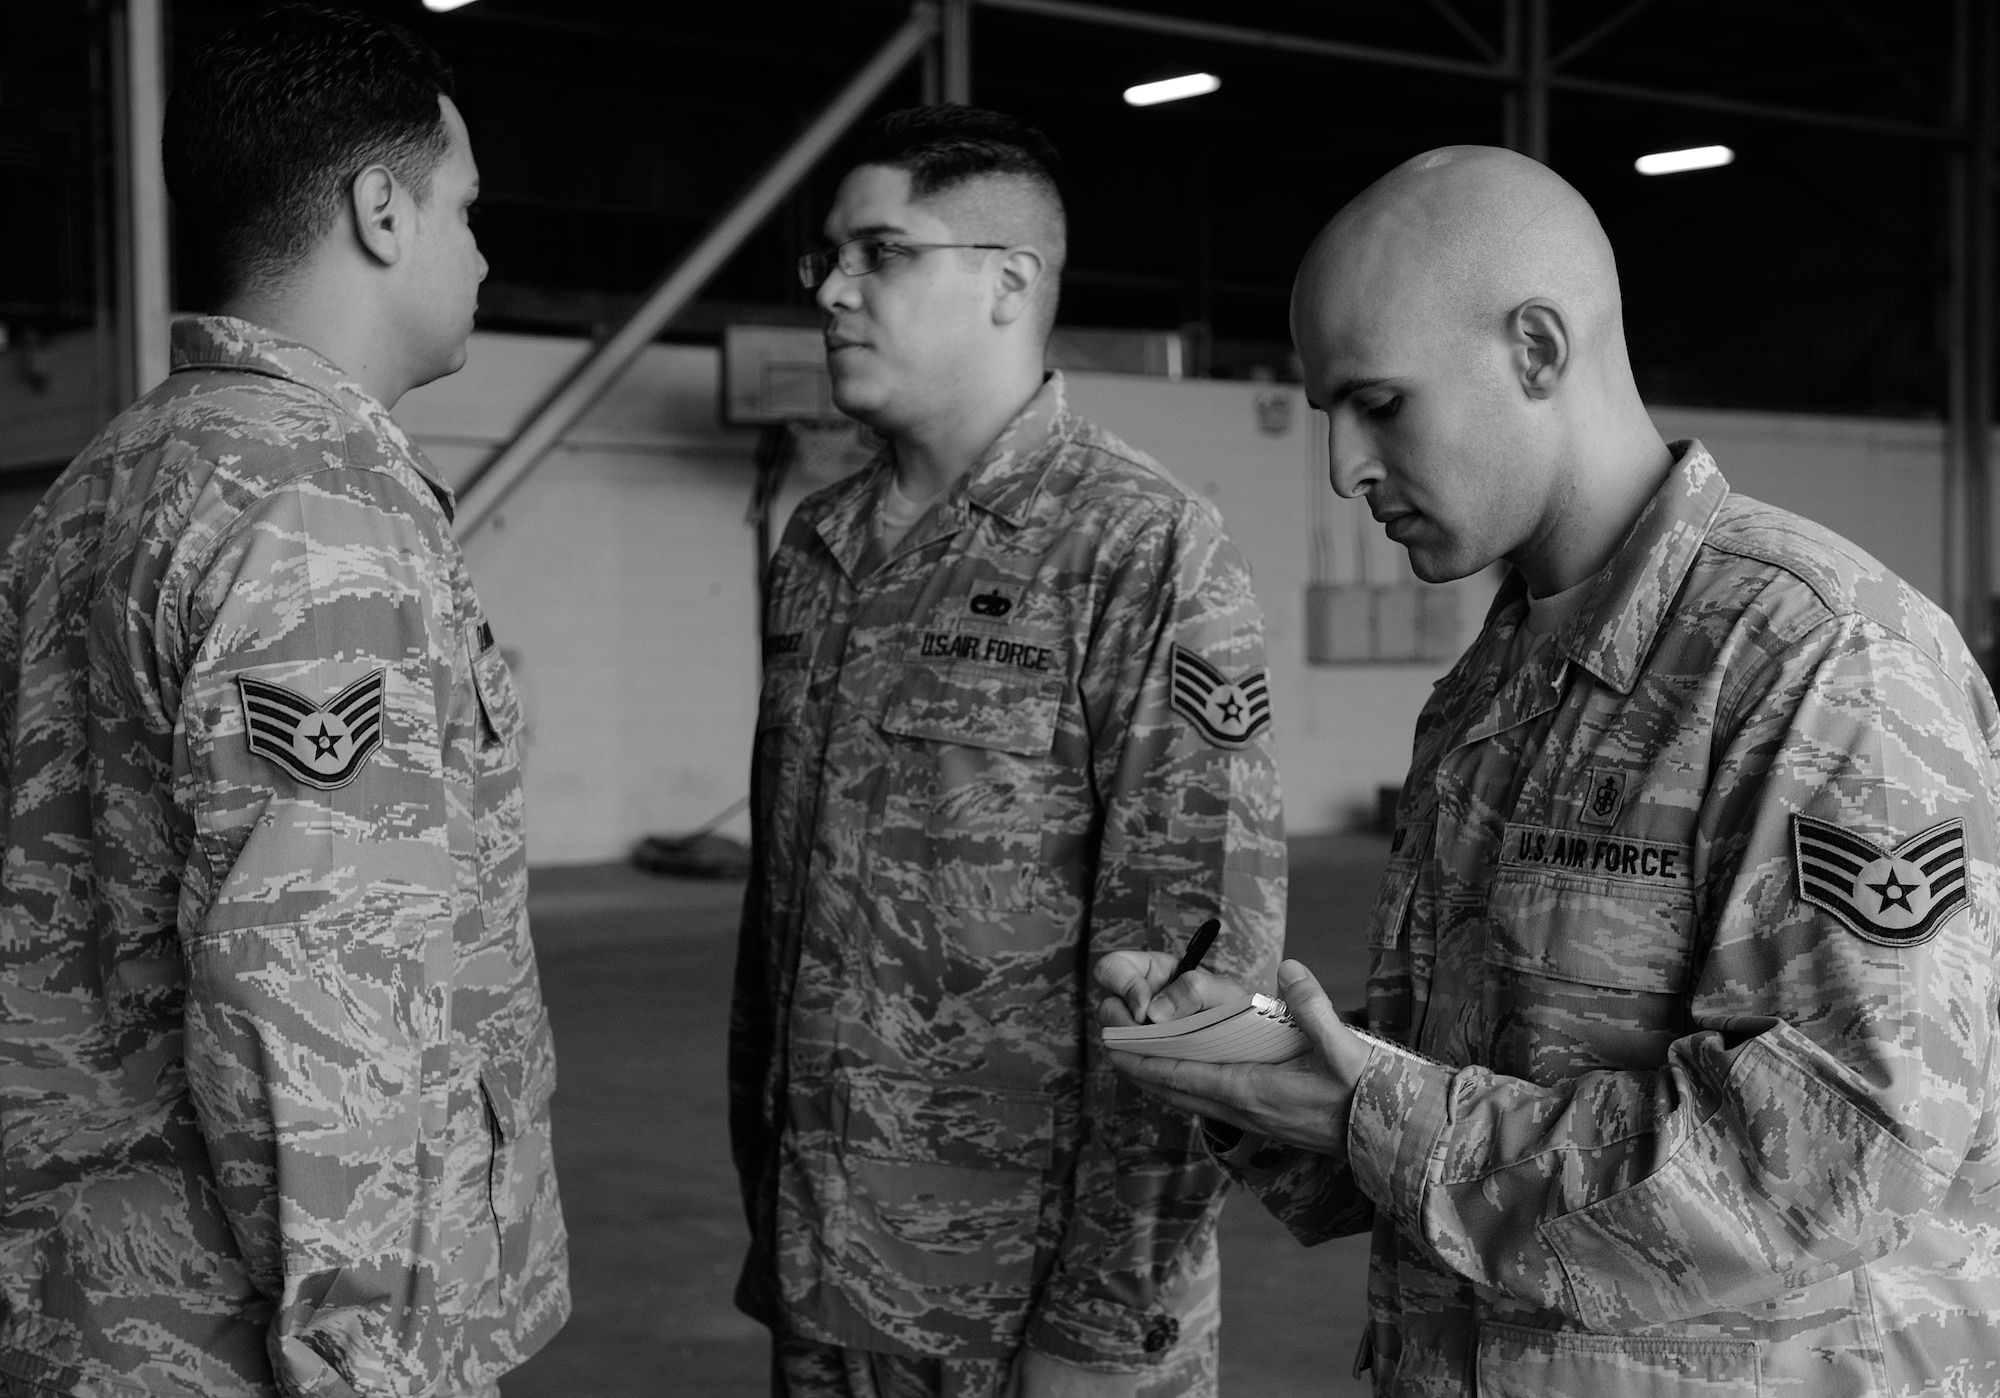 Staff Sgt. Hector Quinones-Santiago, 728th Air Mobility Squadron, stands at attention while Staff Sgts. Ismael Rodriguez, 728th AMS, and Constantine Malek, 39th Medical Support Squadron, inspect his uniform during an Incirlik Honor Guard practice session Tuesday, Jan. 19, 2010 at Incirlik Air Base, Turkey. The team practices at least once a week and encourages Airmen interested in joining to attend a practice session. (U.S. Air Force photo/Senior Airman Alex Martinez)